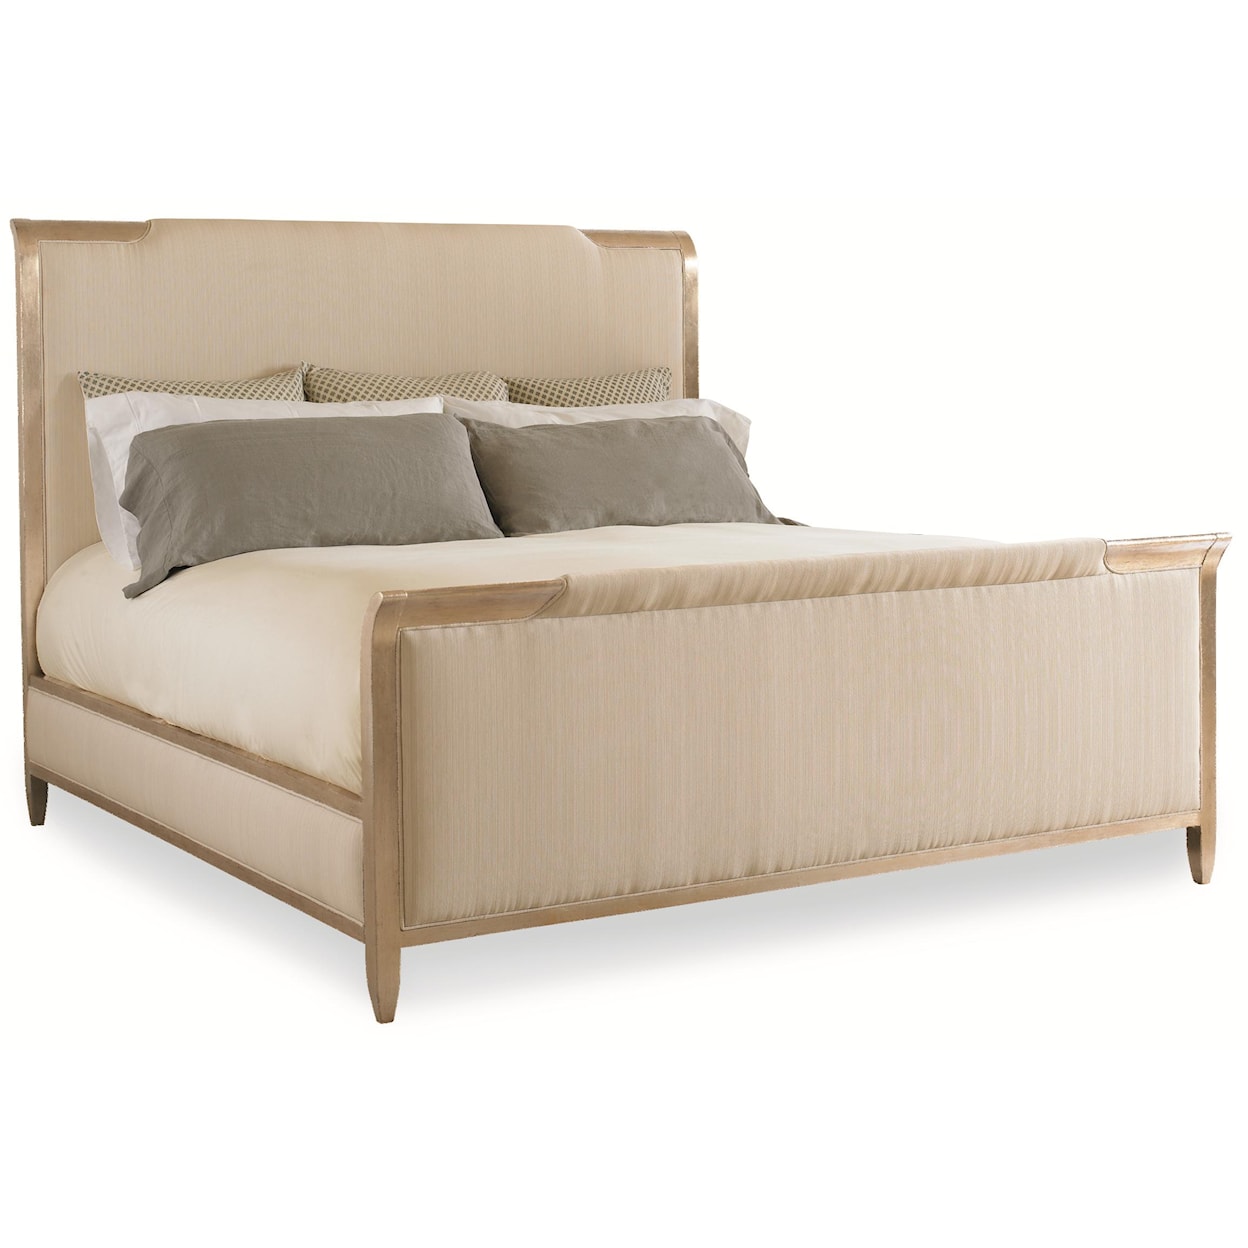 Caracole Caracole Classic King "Nite in Shining Armor" Bed